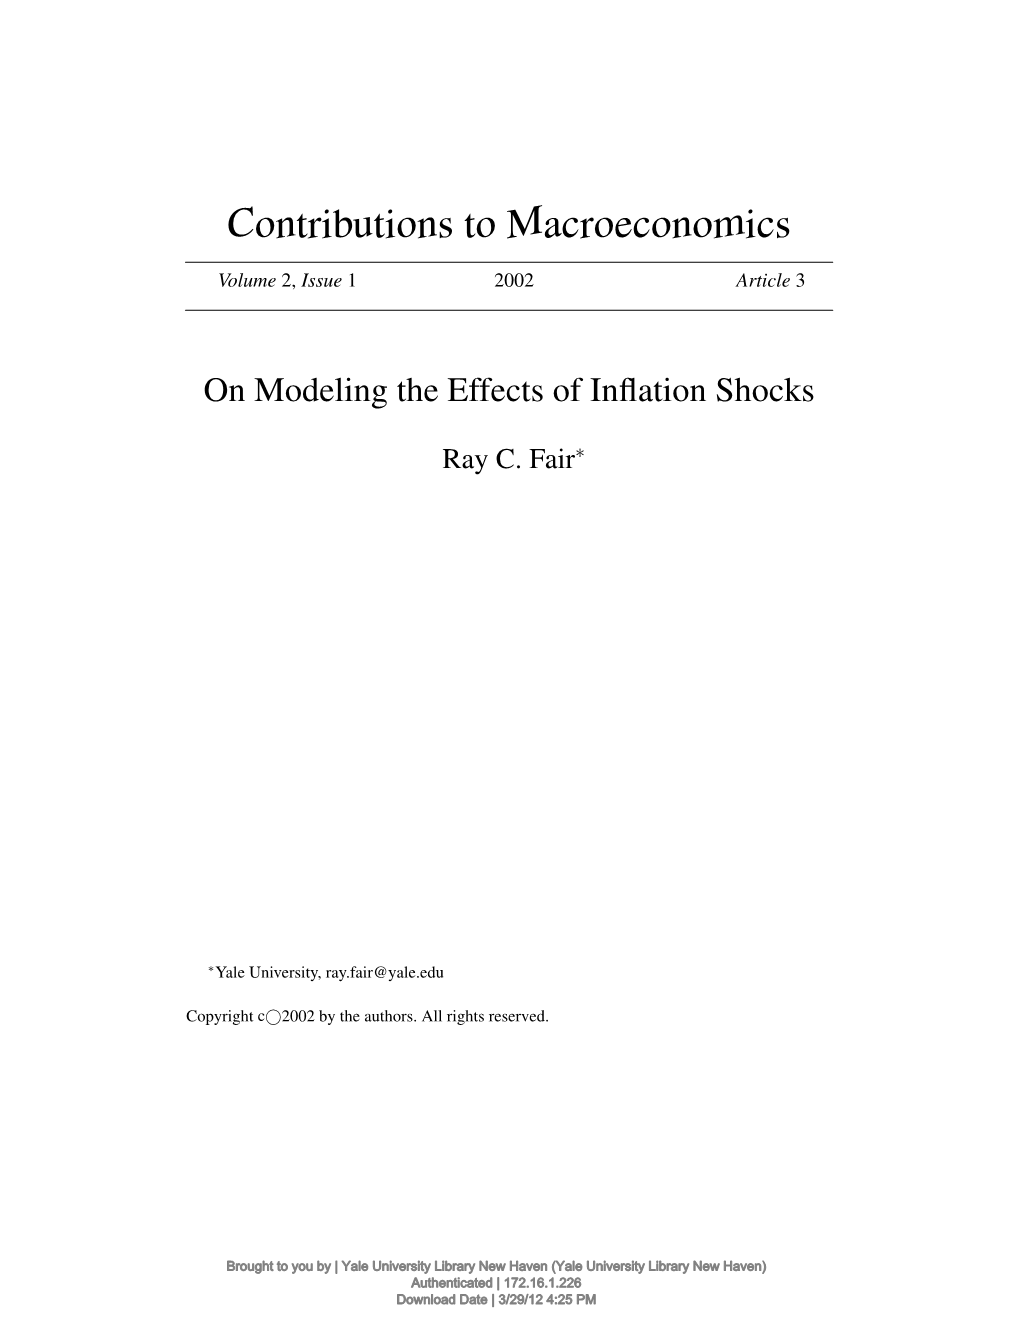 On Modeling the Effects of Inflation Shocks